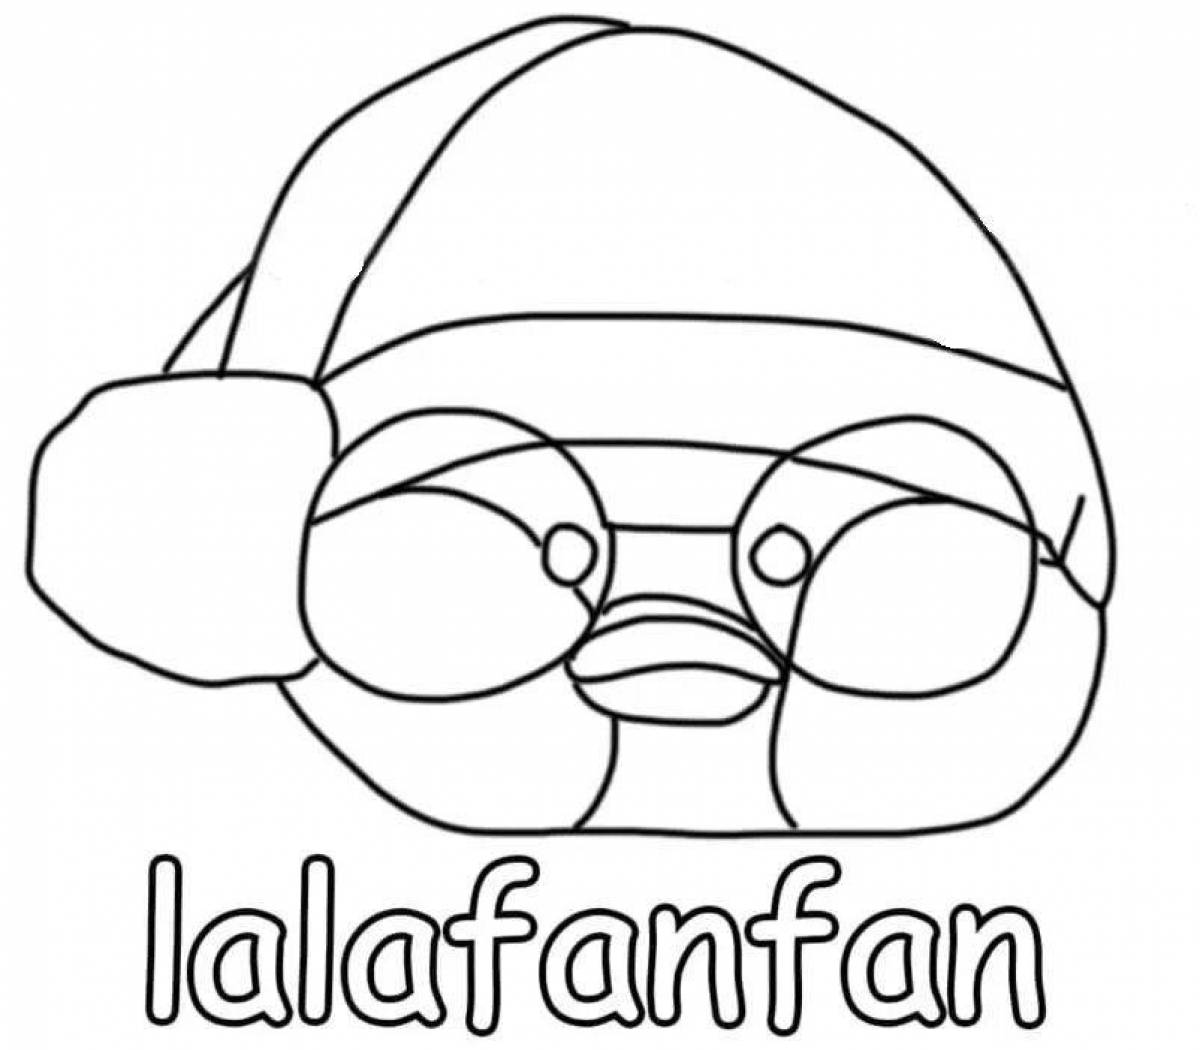 Lalafanfan stylish duck with clothes